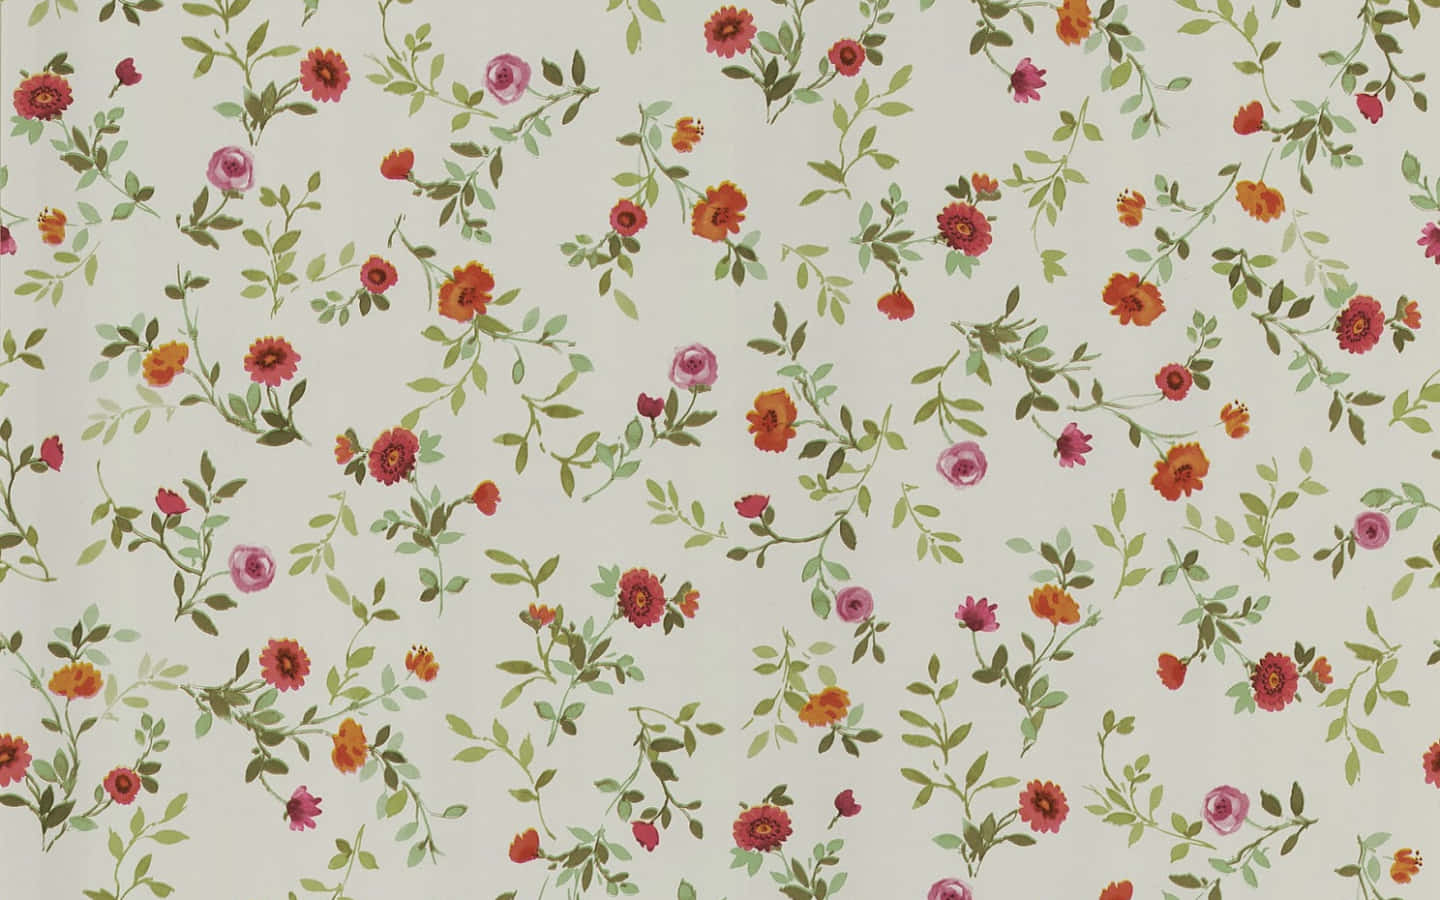 Vintage Floral Background With Delicate Flowers And Foliage